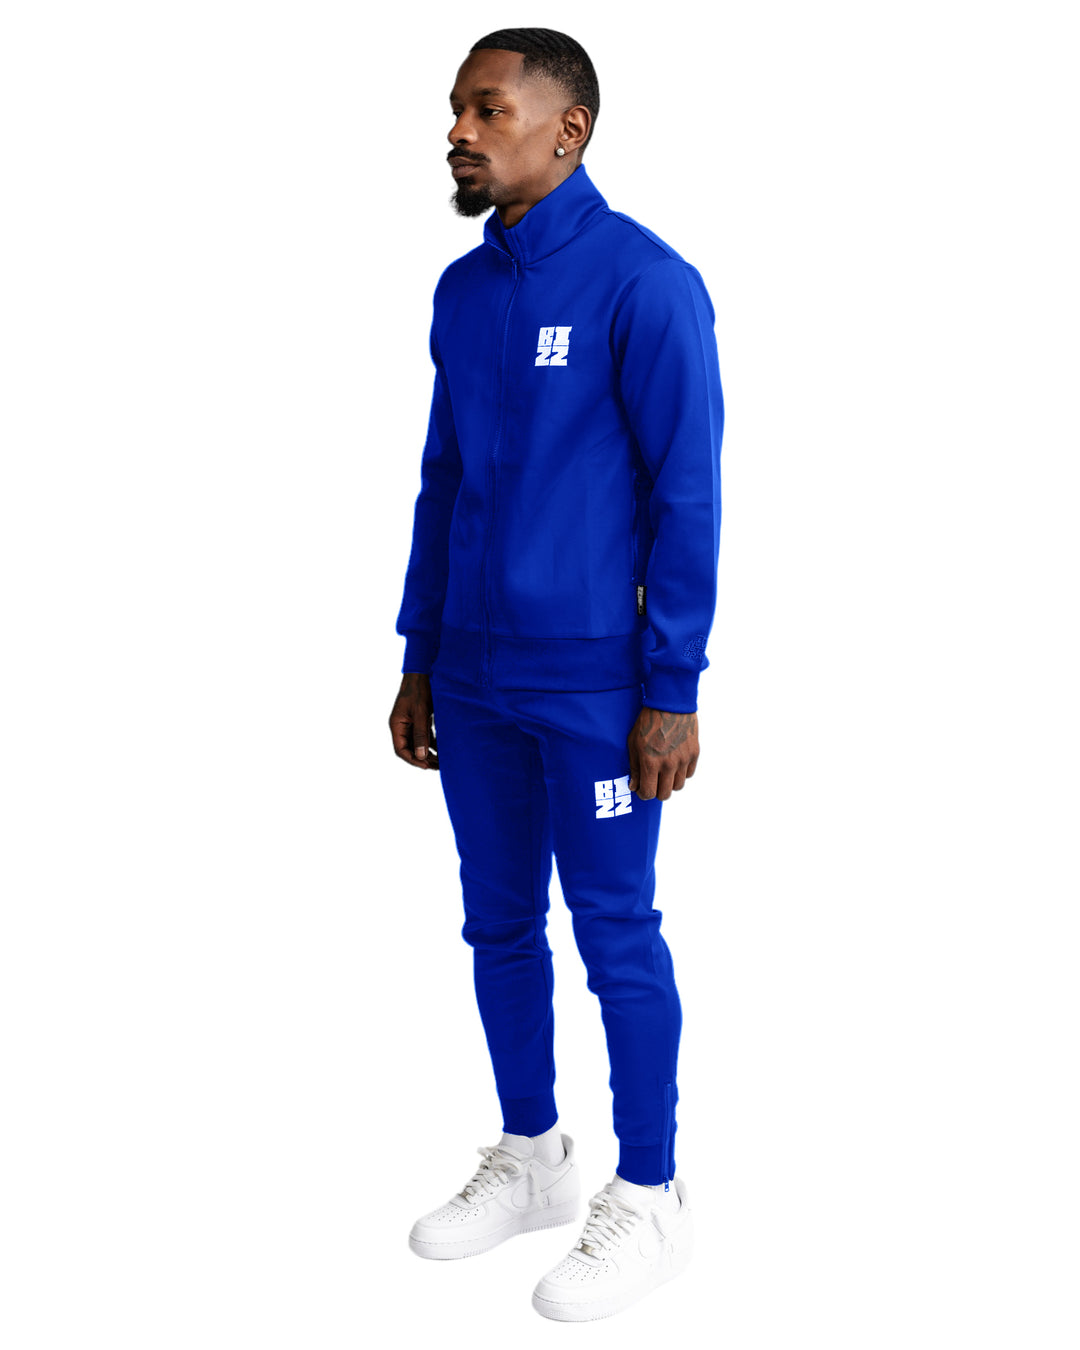 Bizz Tracksuit in Royal/White